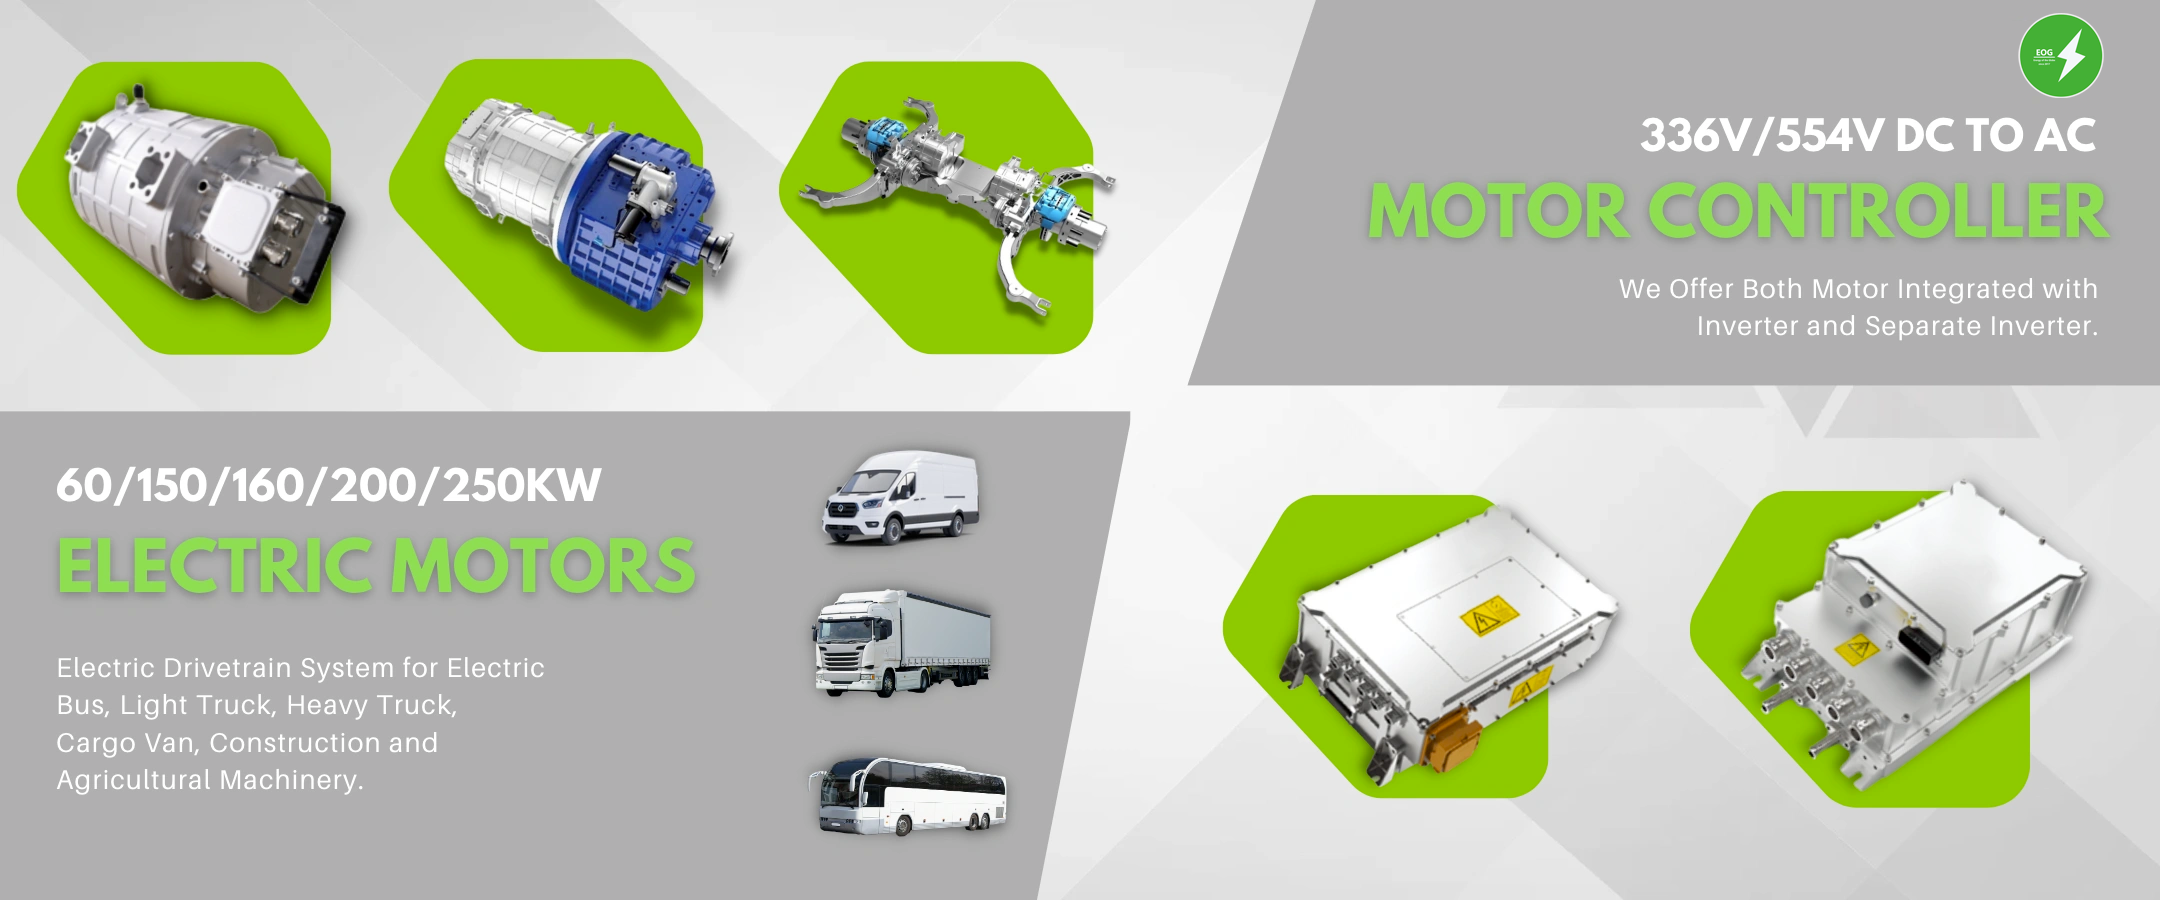 Electric drivetrain system motors and motor controller for electric bus truck cargo van and machinery